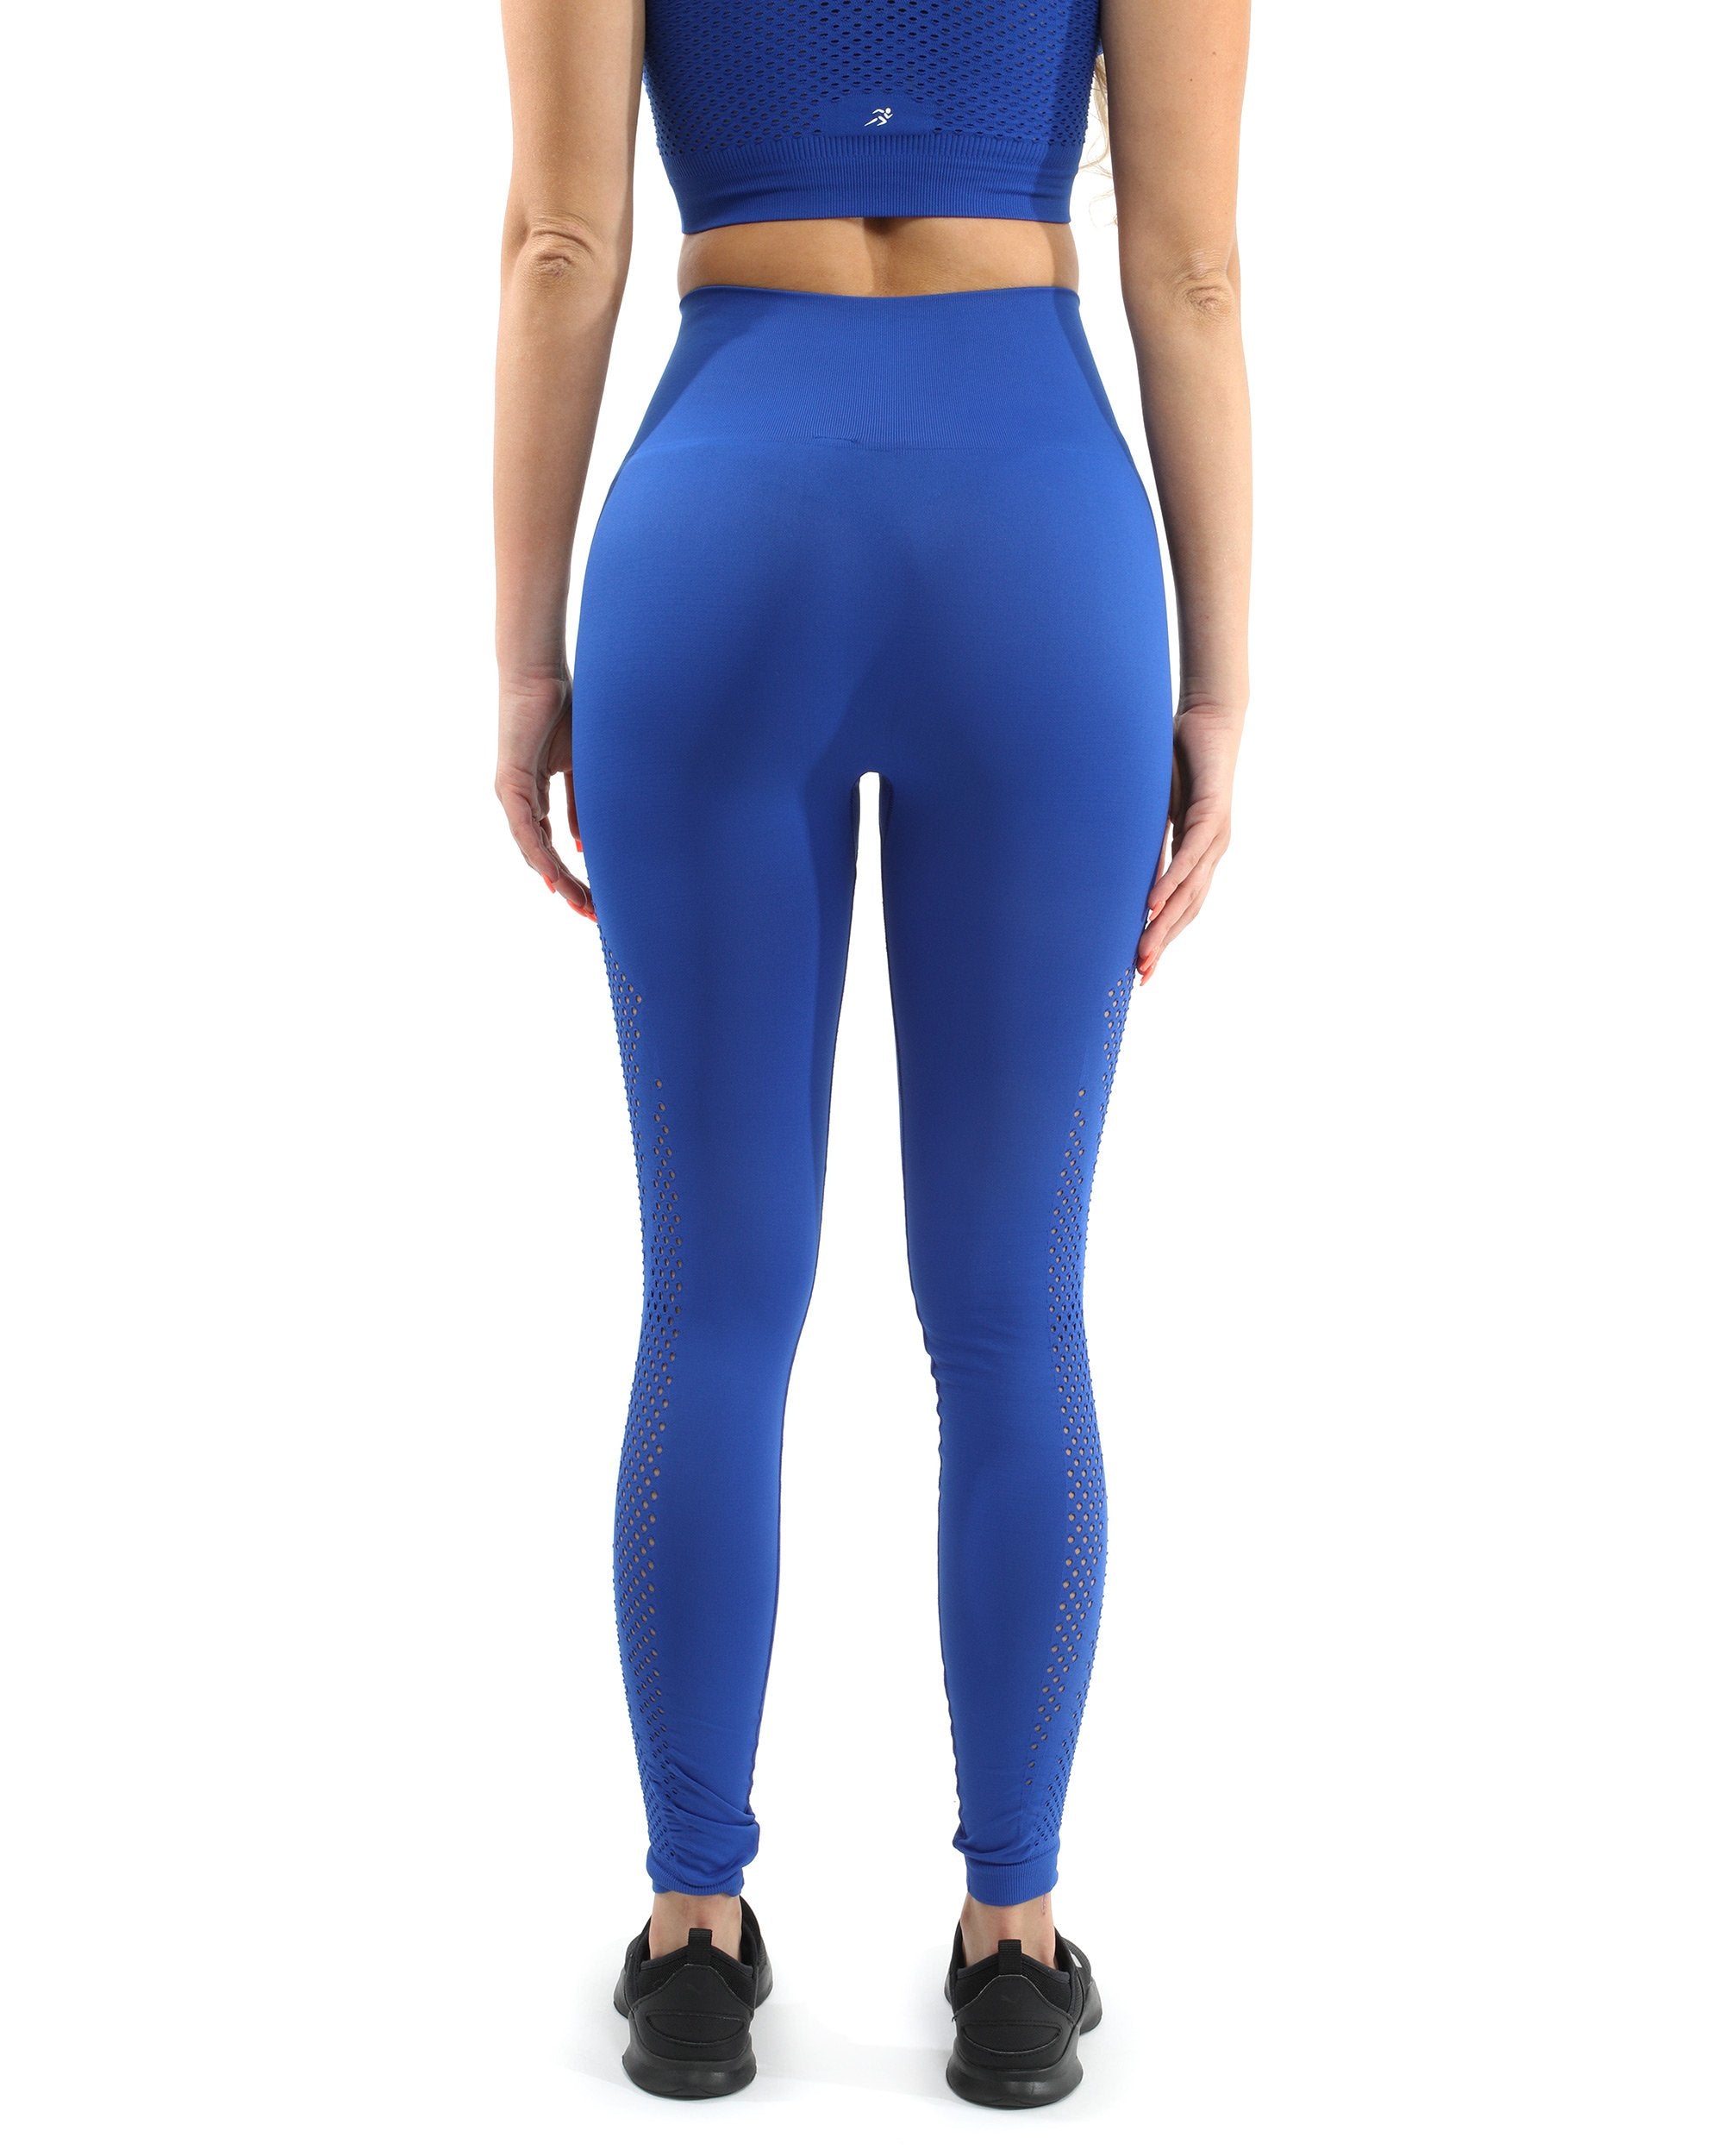 SALE! 50% OFF! Milano Seamless Legging - Blue [MADE IN ITALY] - Size Small